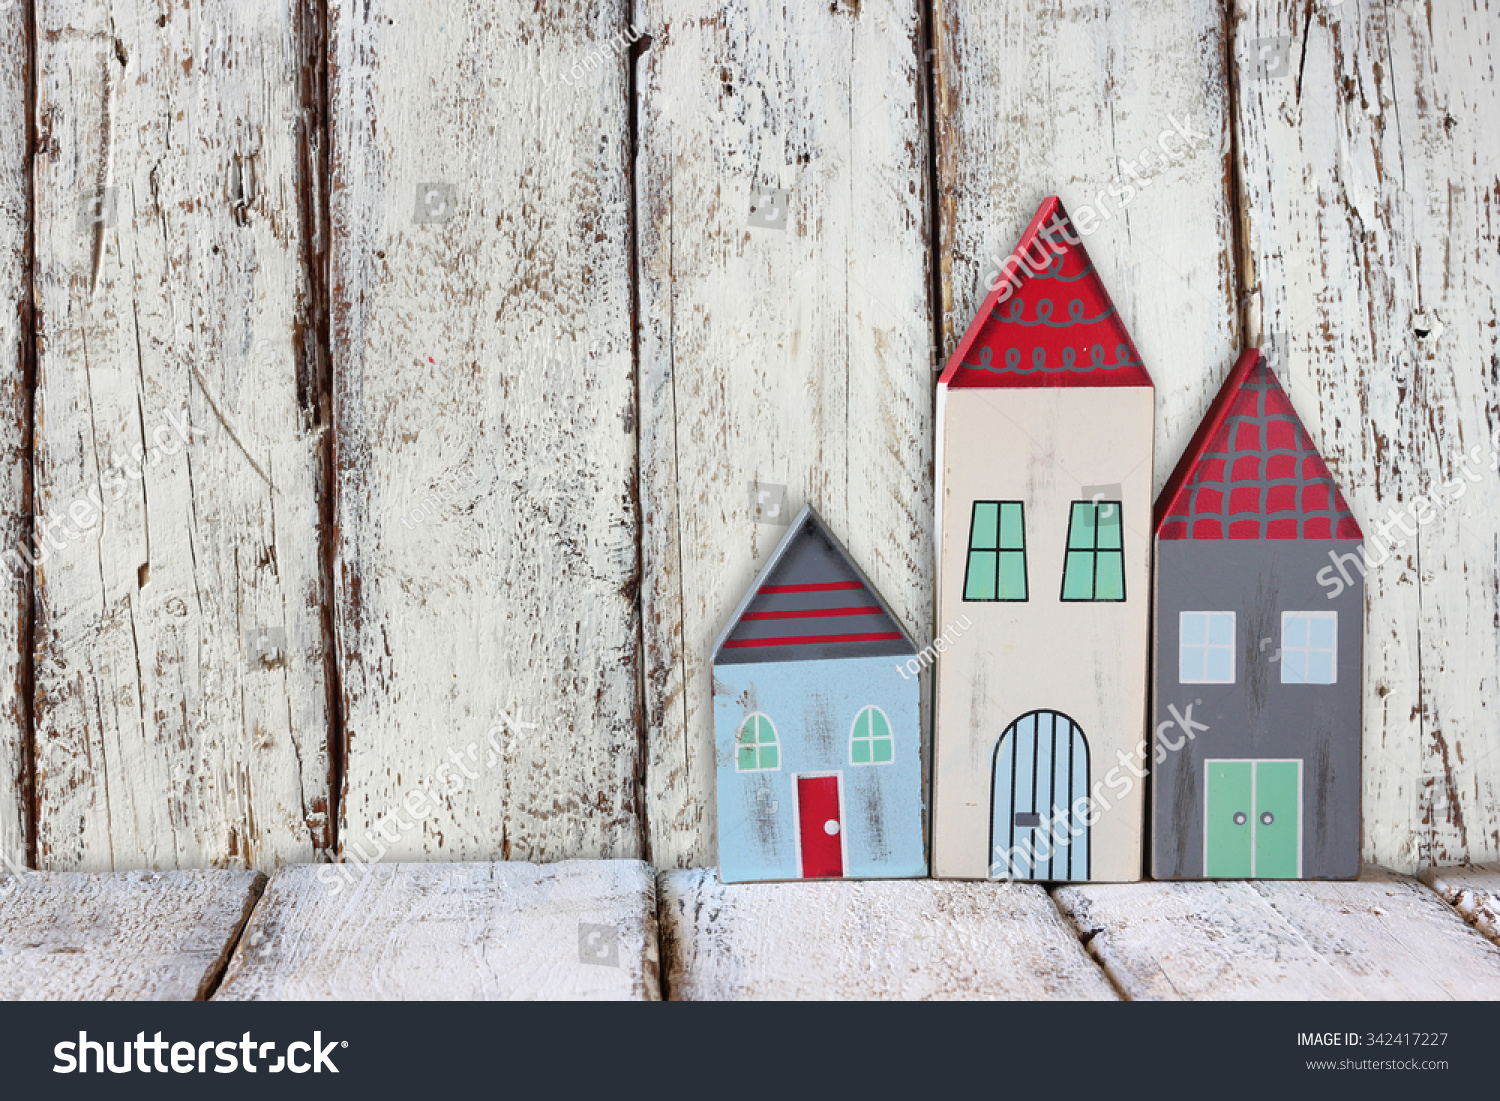 image of vintage wooden colorful houses decoration on wooden table.
 #342417227